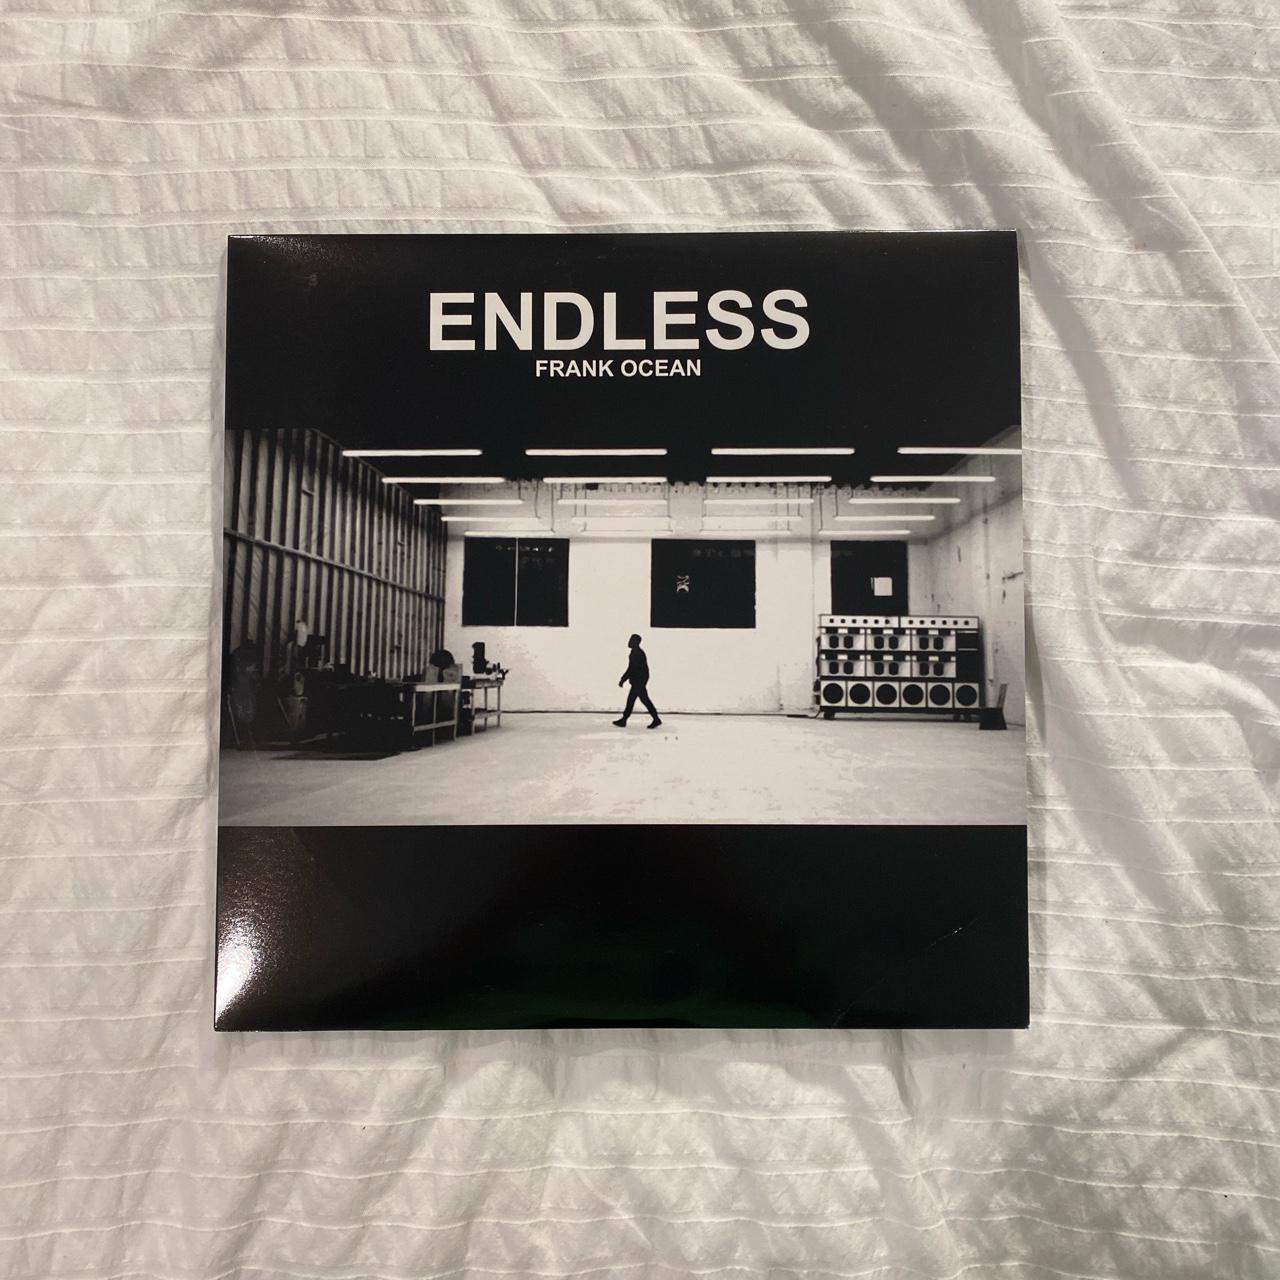 STILL AVAILABLE! ❗️❗️ Endless by Frank Ocean Clear... - Depop